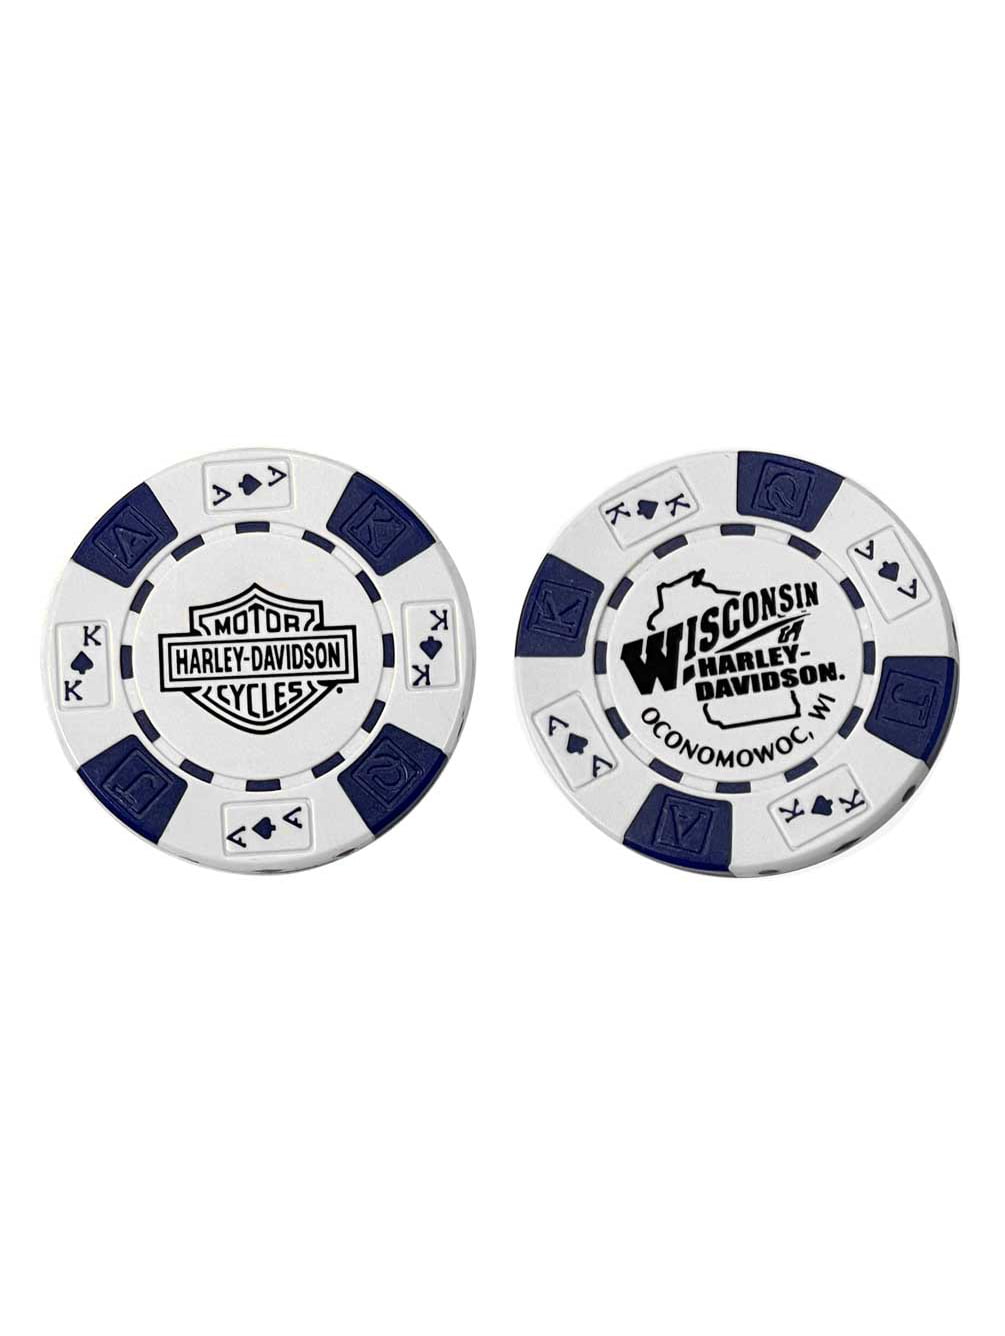 That's What She Said Protector Holdem Poker Chip/Card Cover Card Guard 